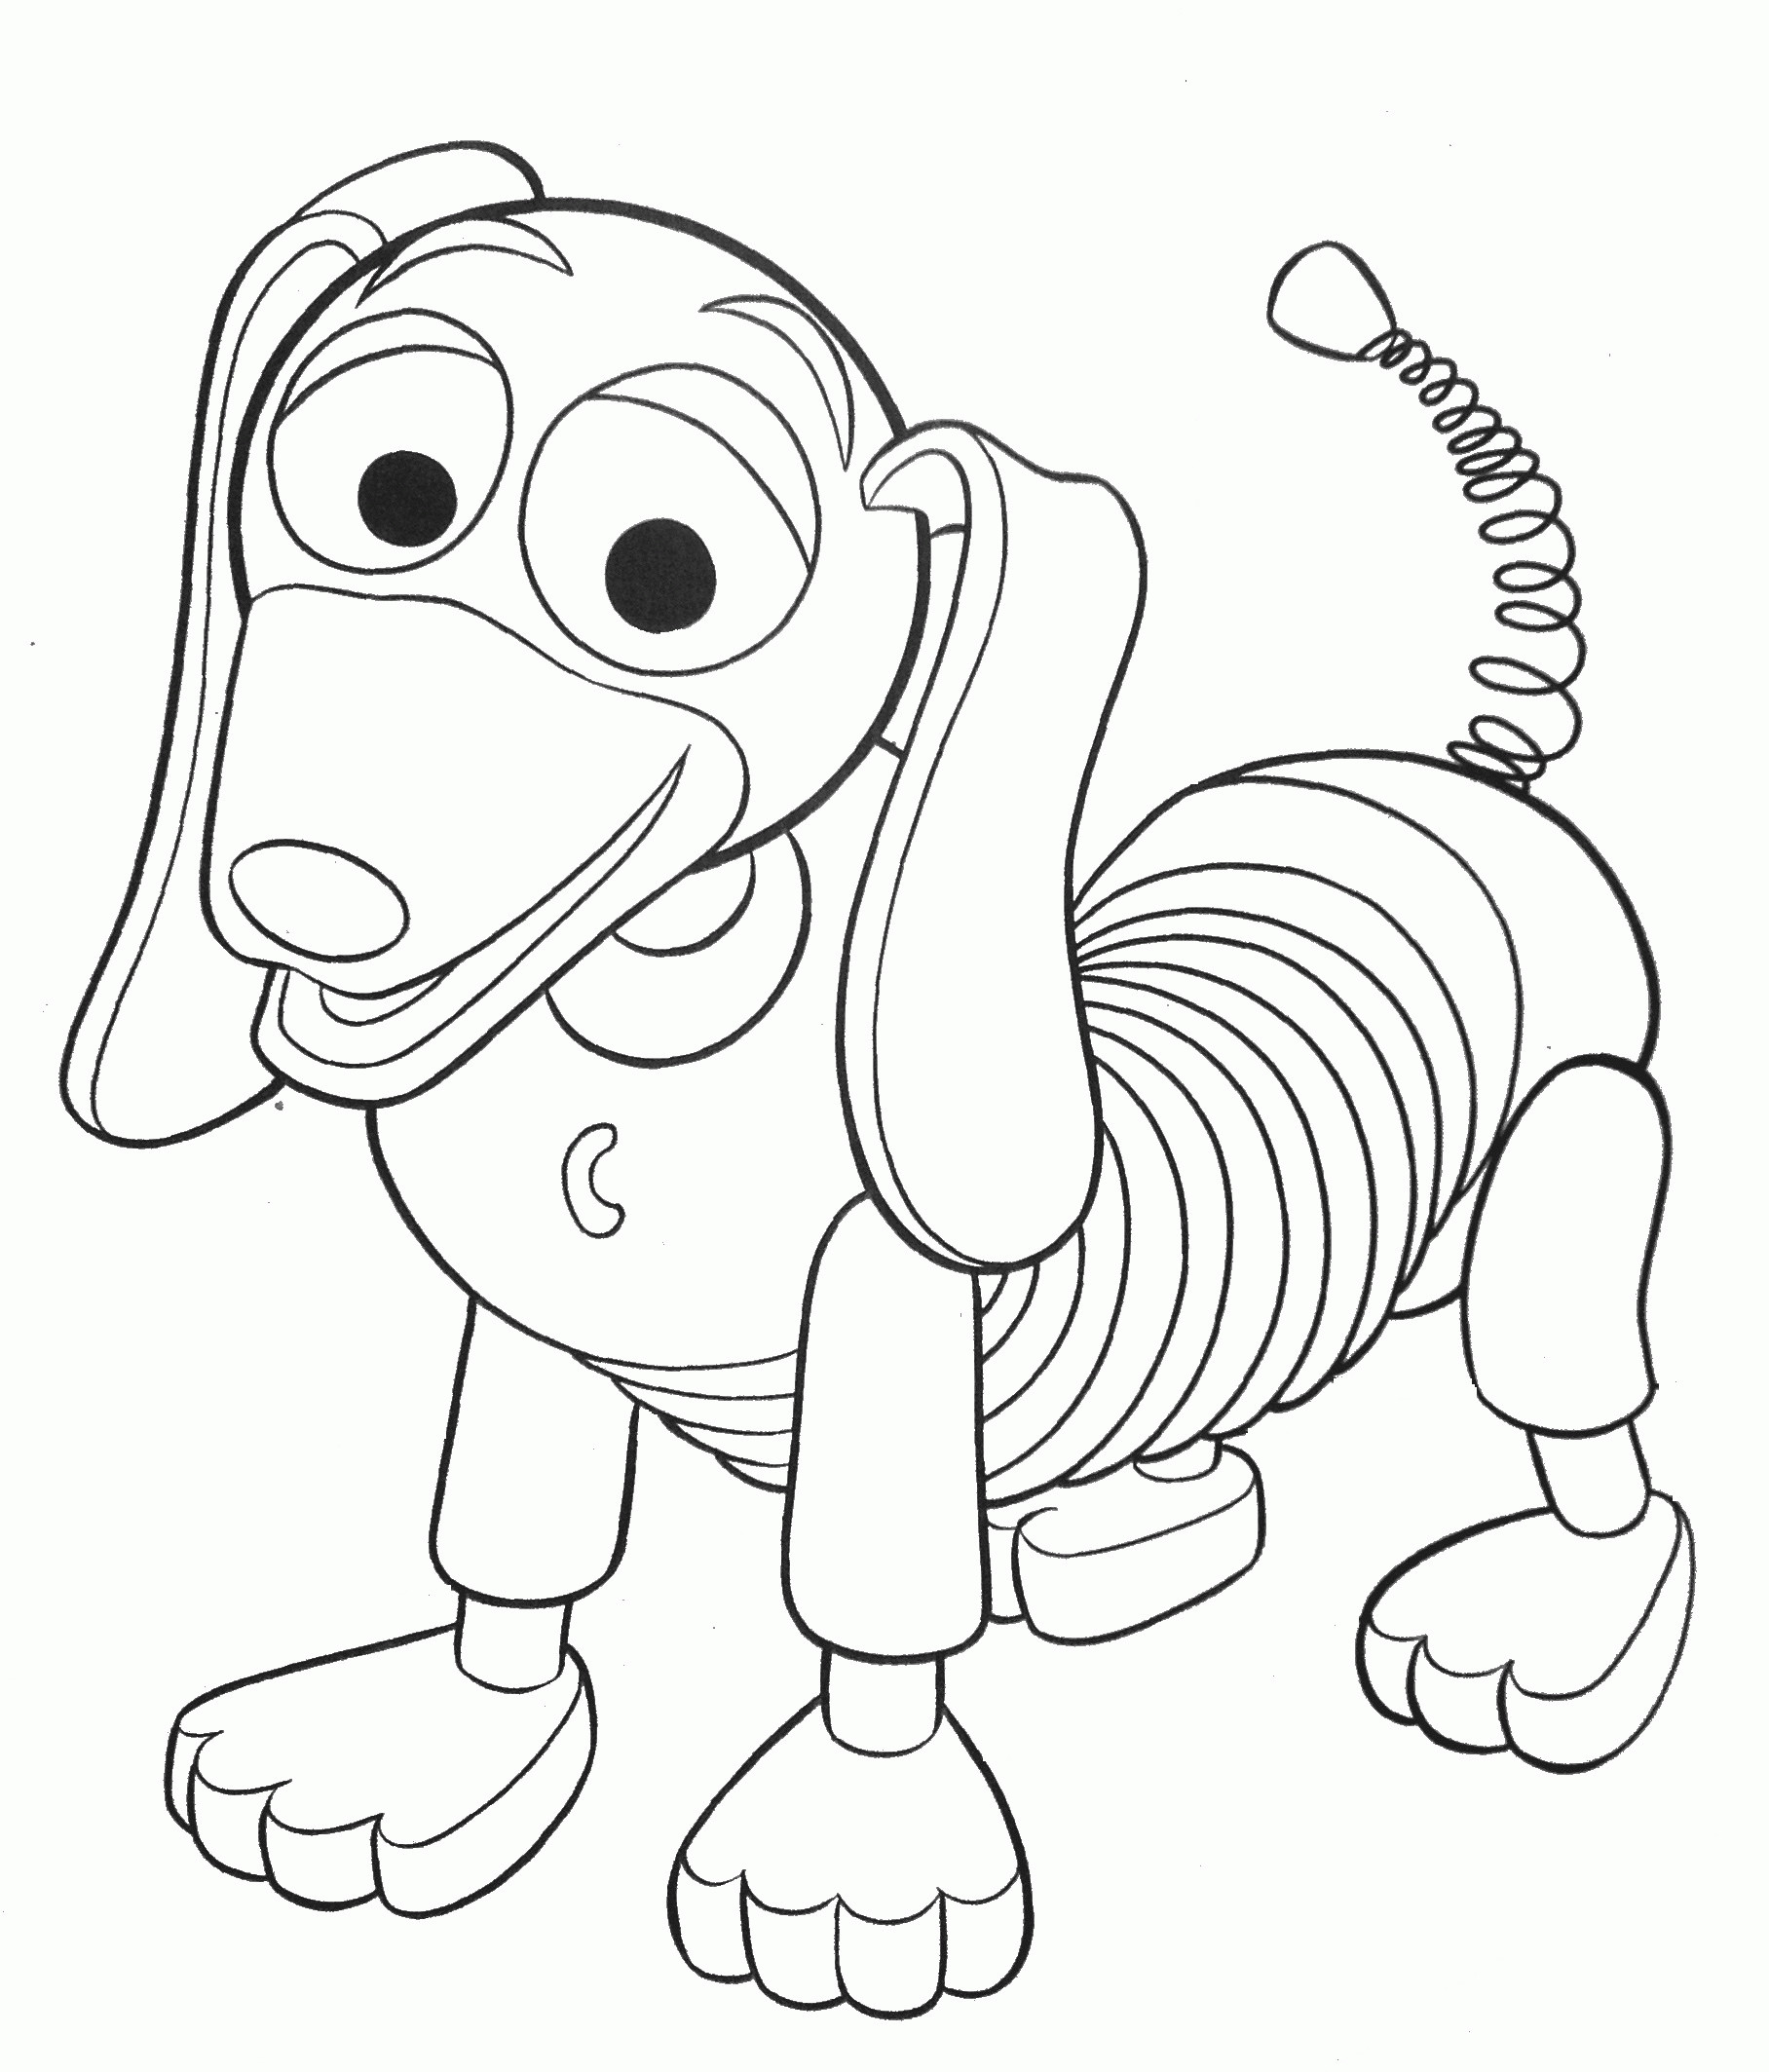 Jessie Coloring Pages
 Toy Story 2 Jessie Coloring Pages Coloring Home